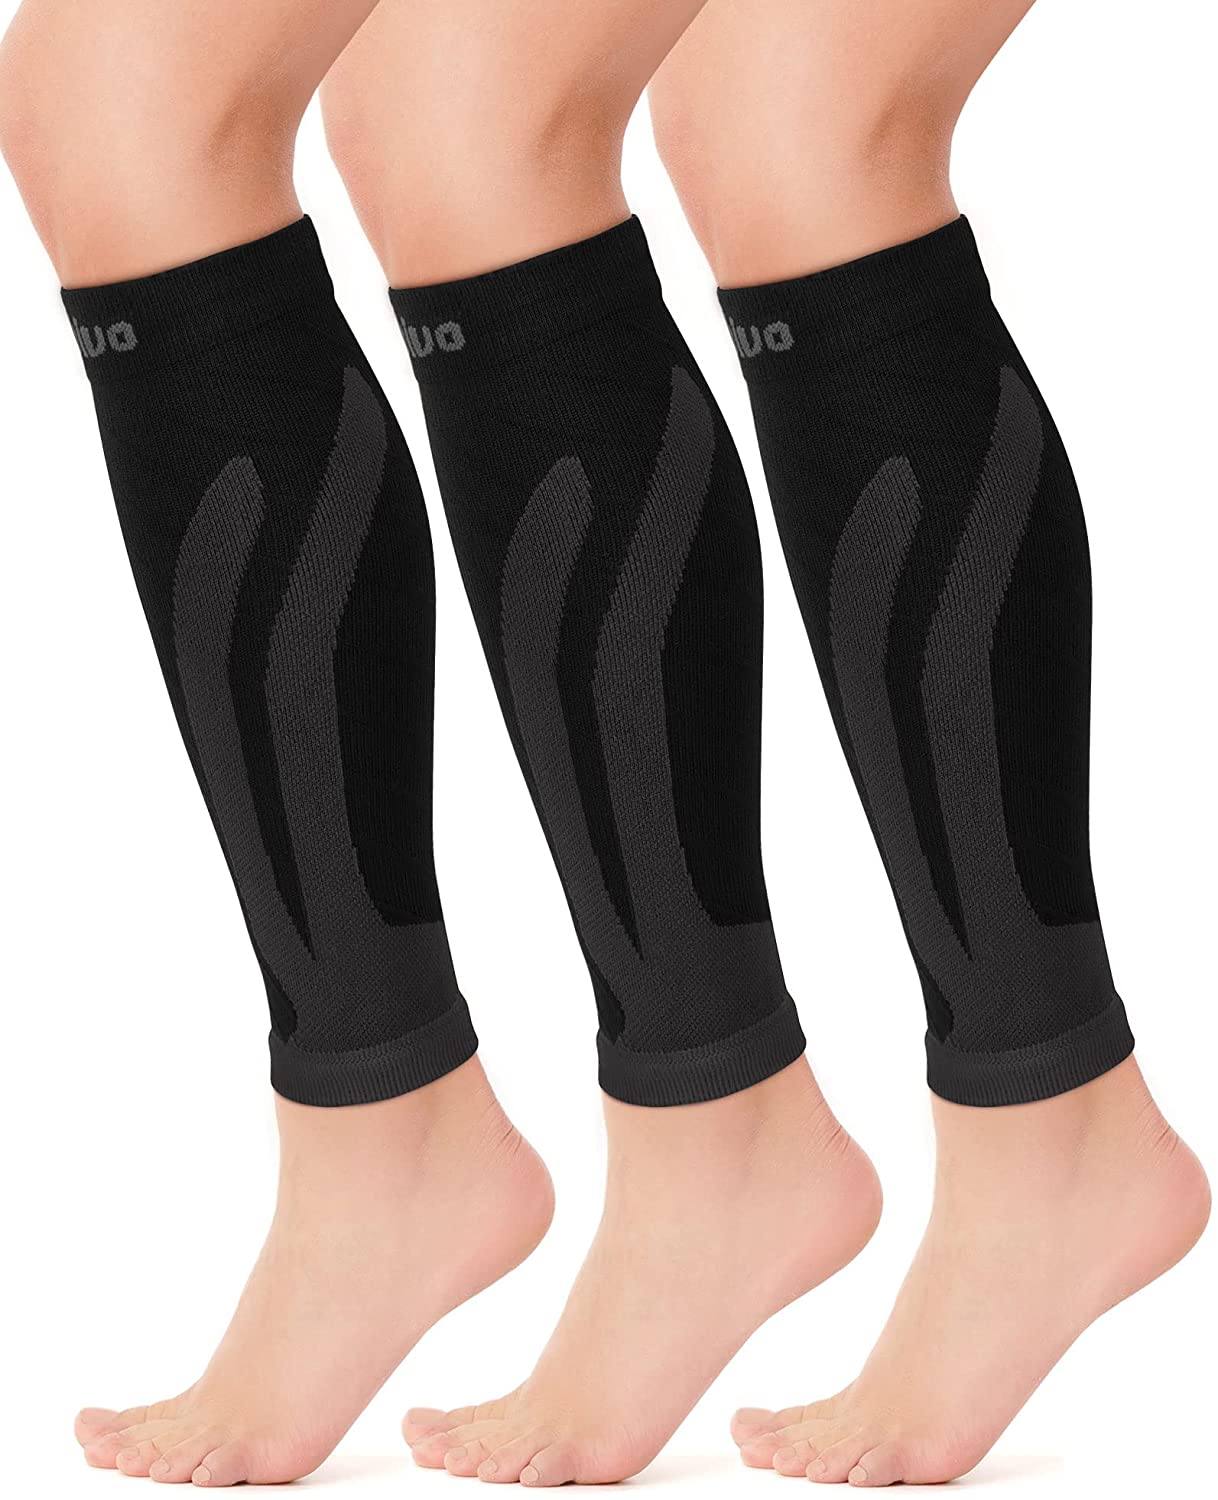 KYK Calf Compression Sleeves for Men & Women, Unisex. Shin Splint Leg  Sleeves. Graduated Compression for